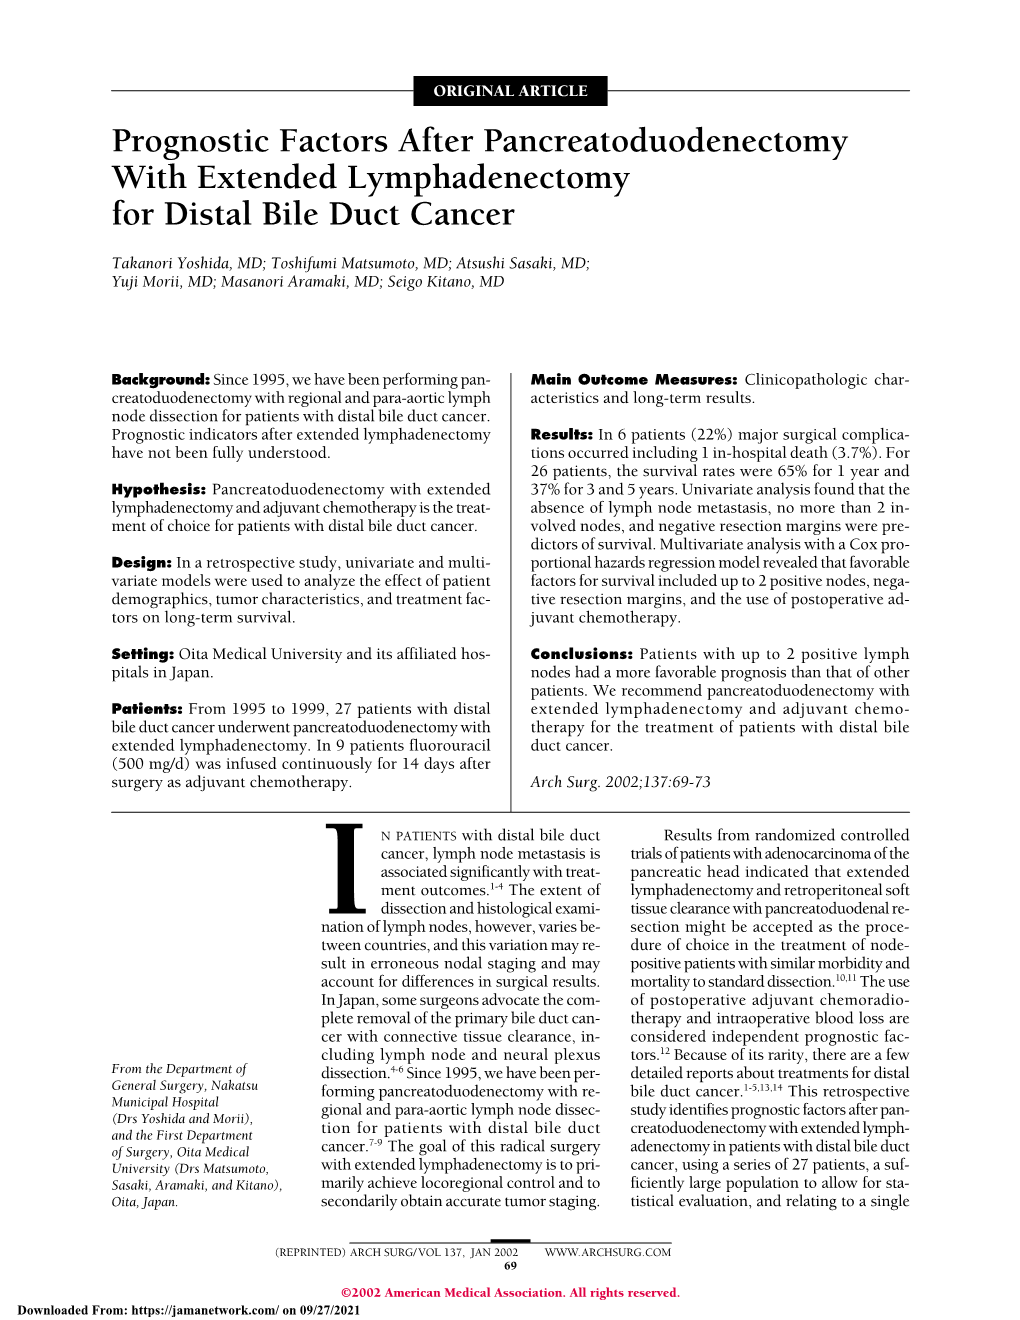 Prognostic Factors After Pancreatoduodenectomy with Extended Lymphadenectomy for Distal Bile Duct Cancer